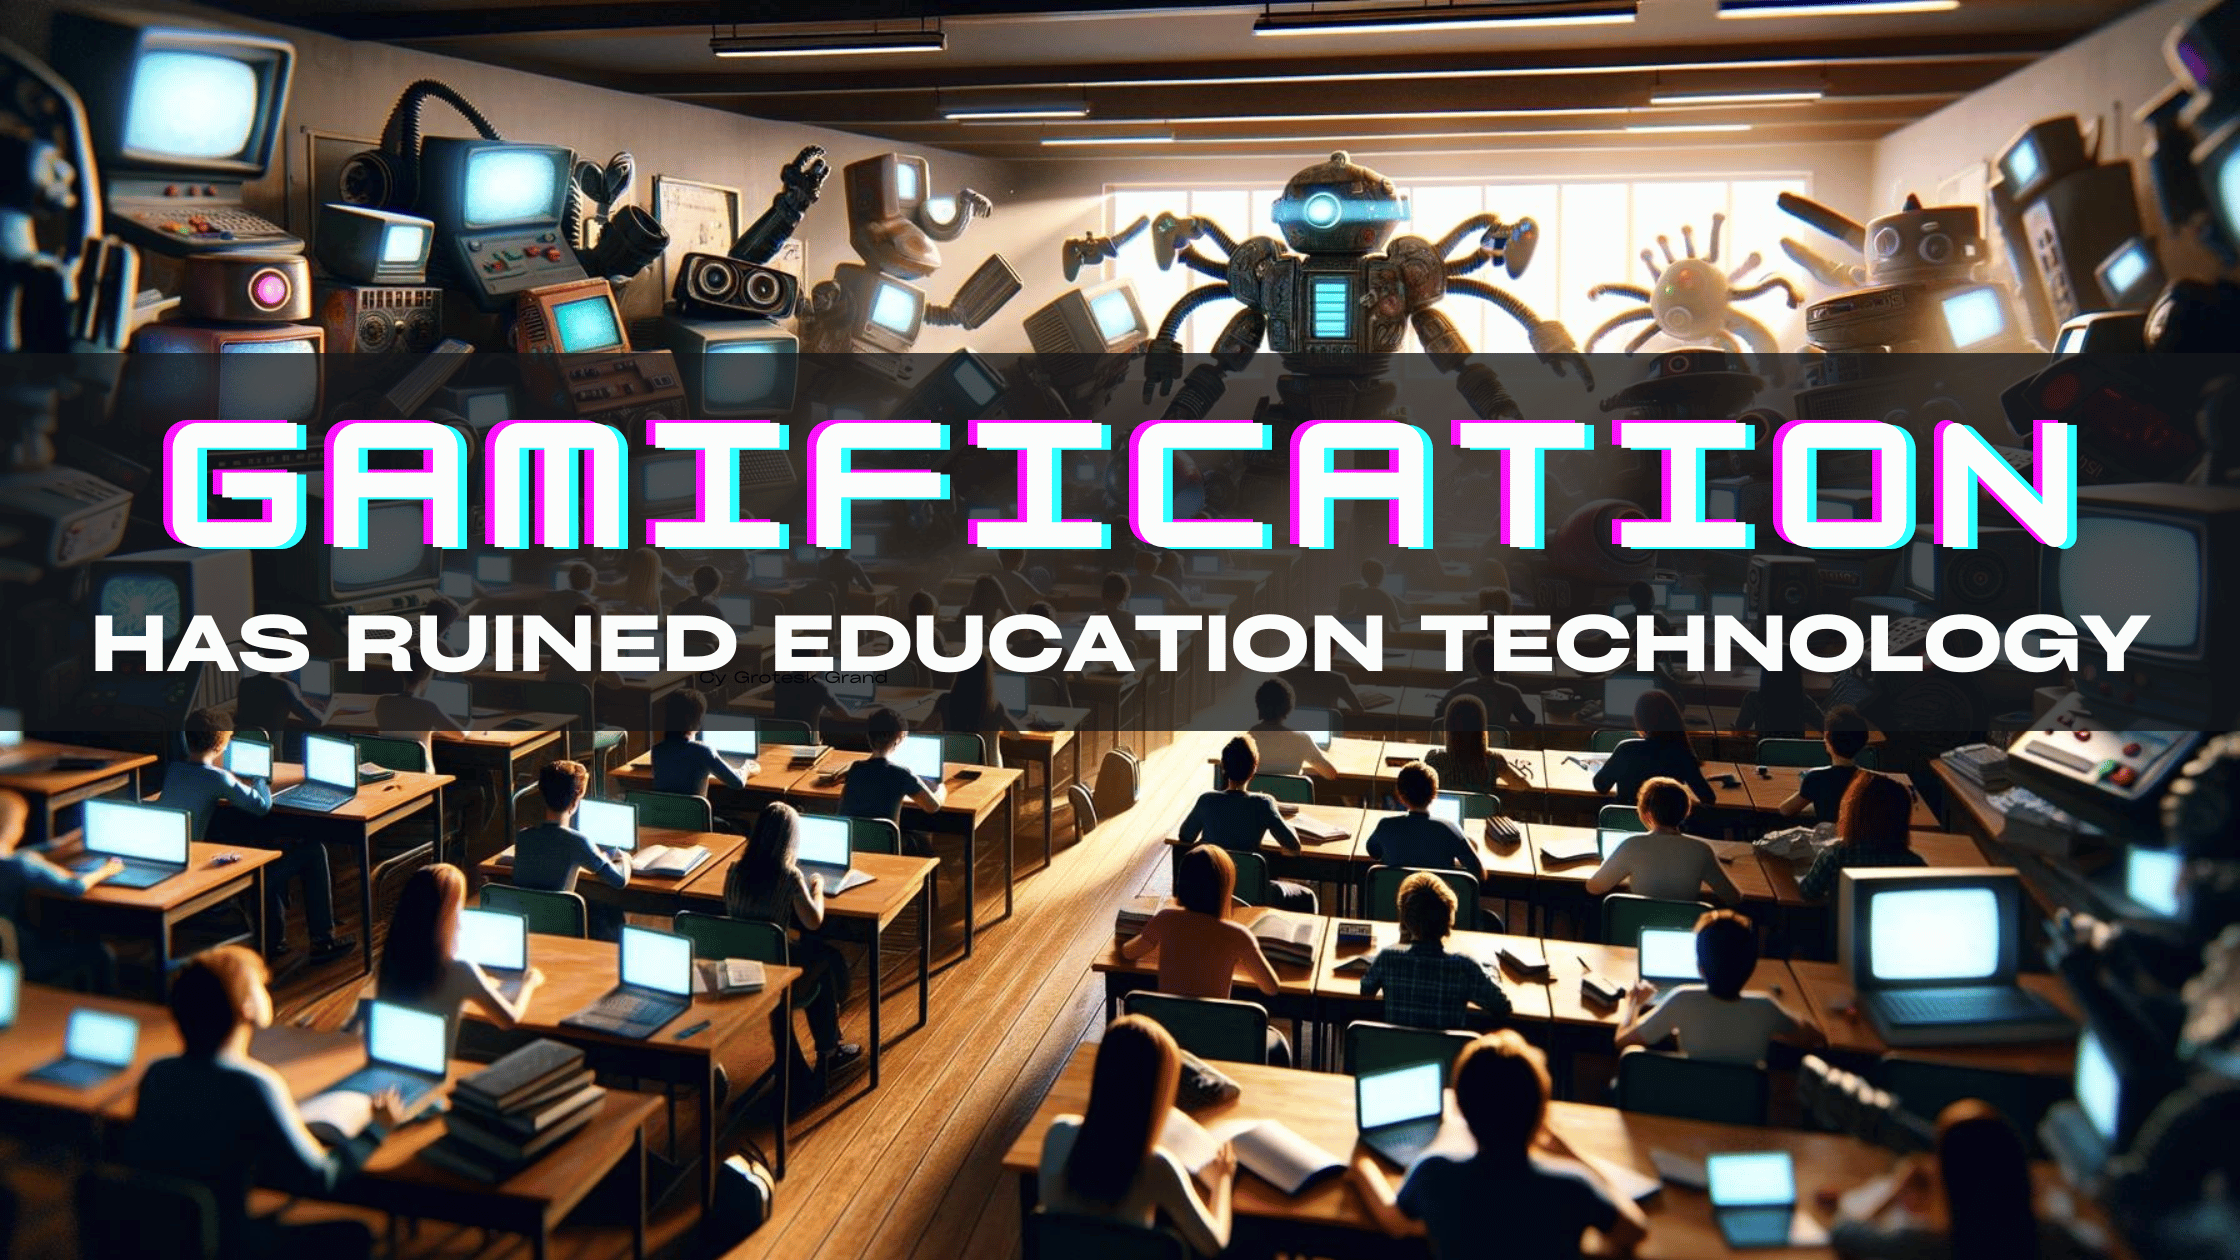 Classroom with students focused on studies, overshadowed by invading gaming robots. "Gamification has ruined education technology" as headline.